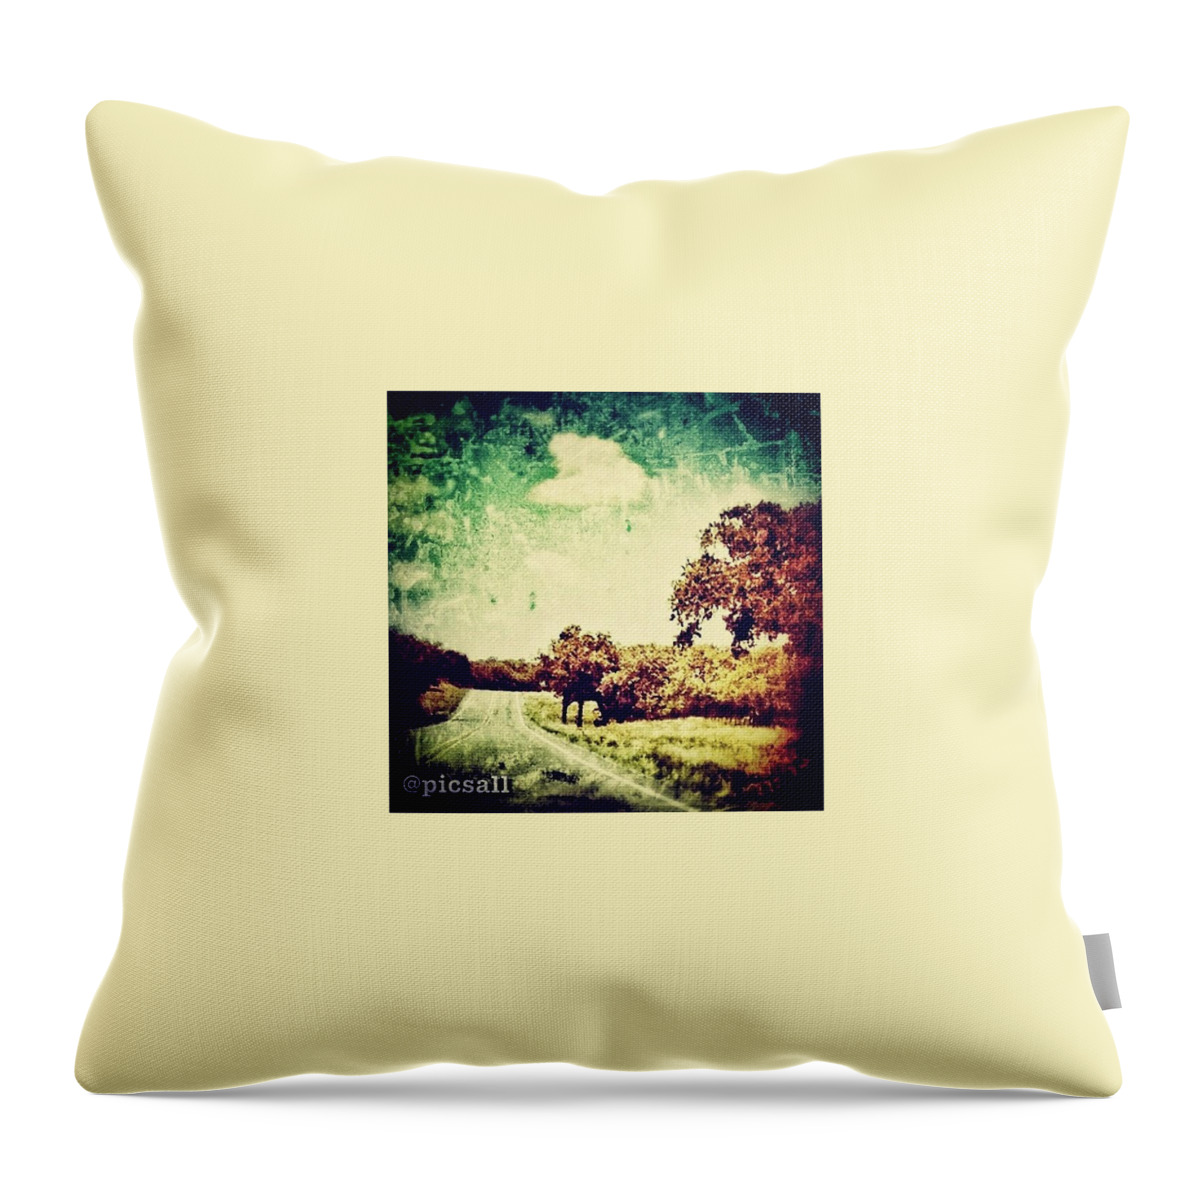 Scenicsunsets Throw Pillow featuring the photograph Texas Hwy 29 by Star Rodriguez